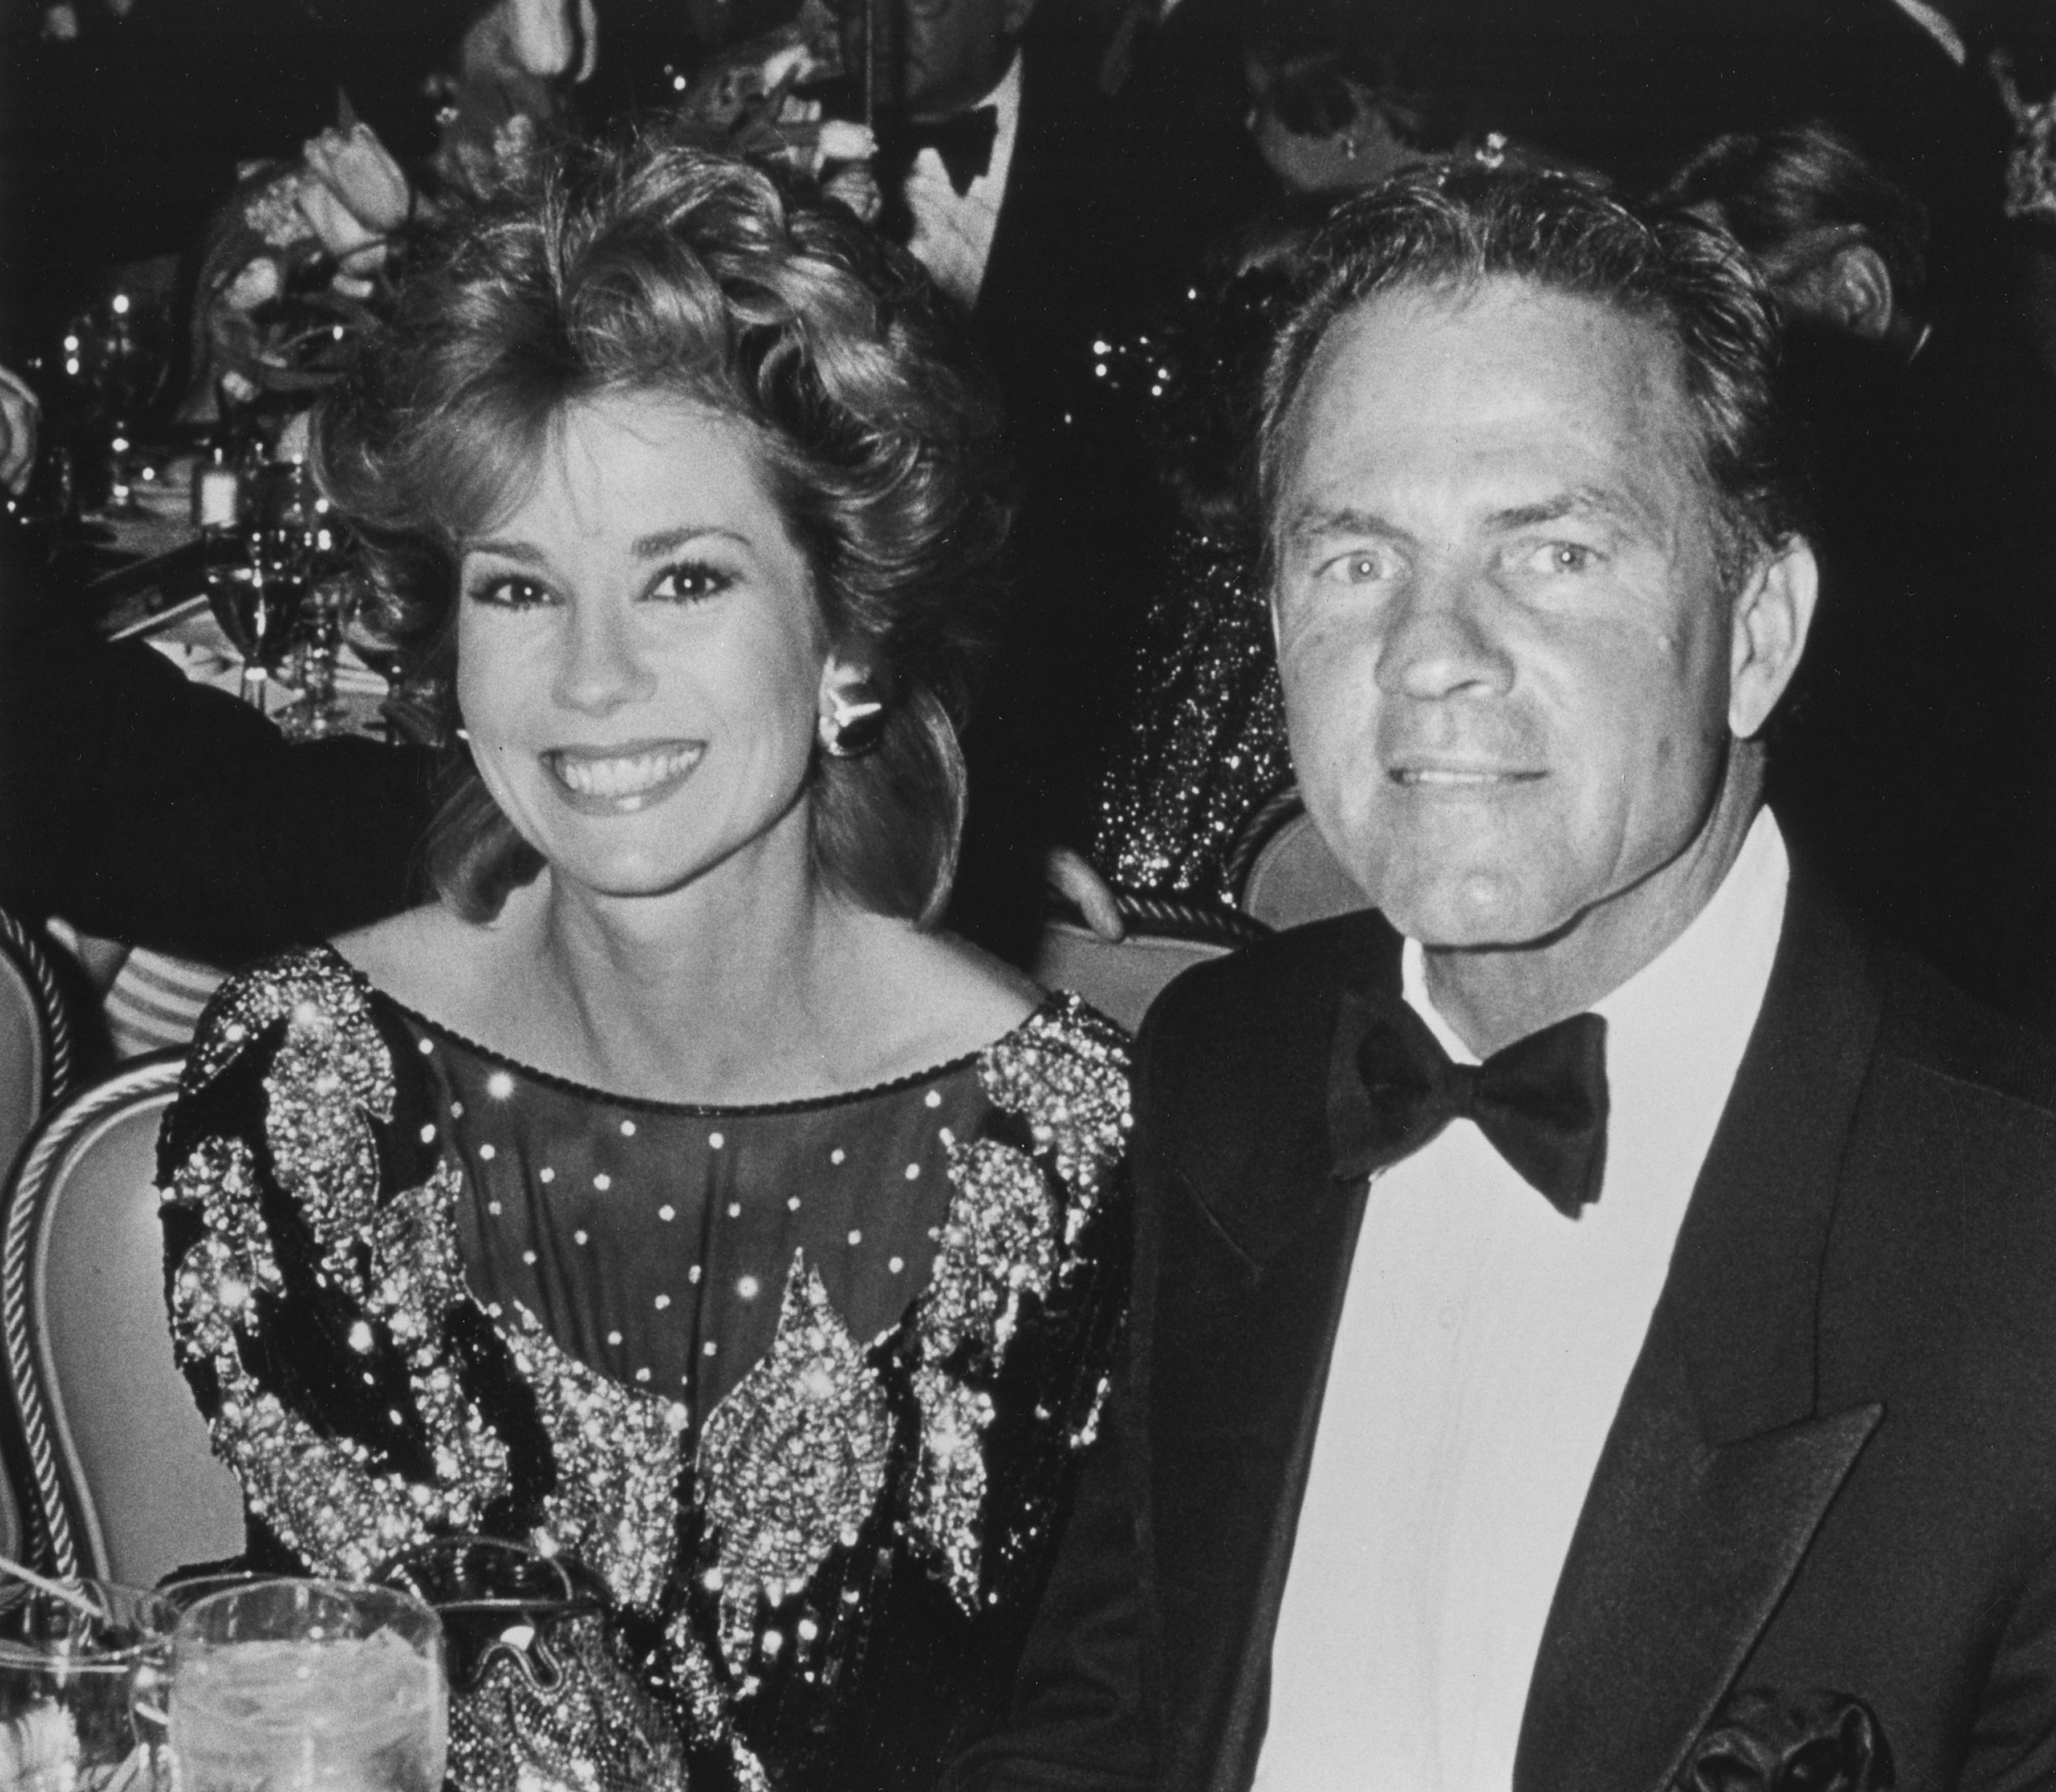 Kathie Lee and Frank Gifford's Proposal and Marriage - Kathie Lee and  Frank's Love Story